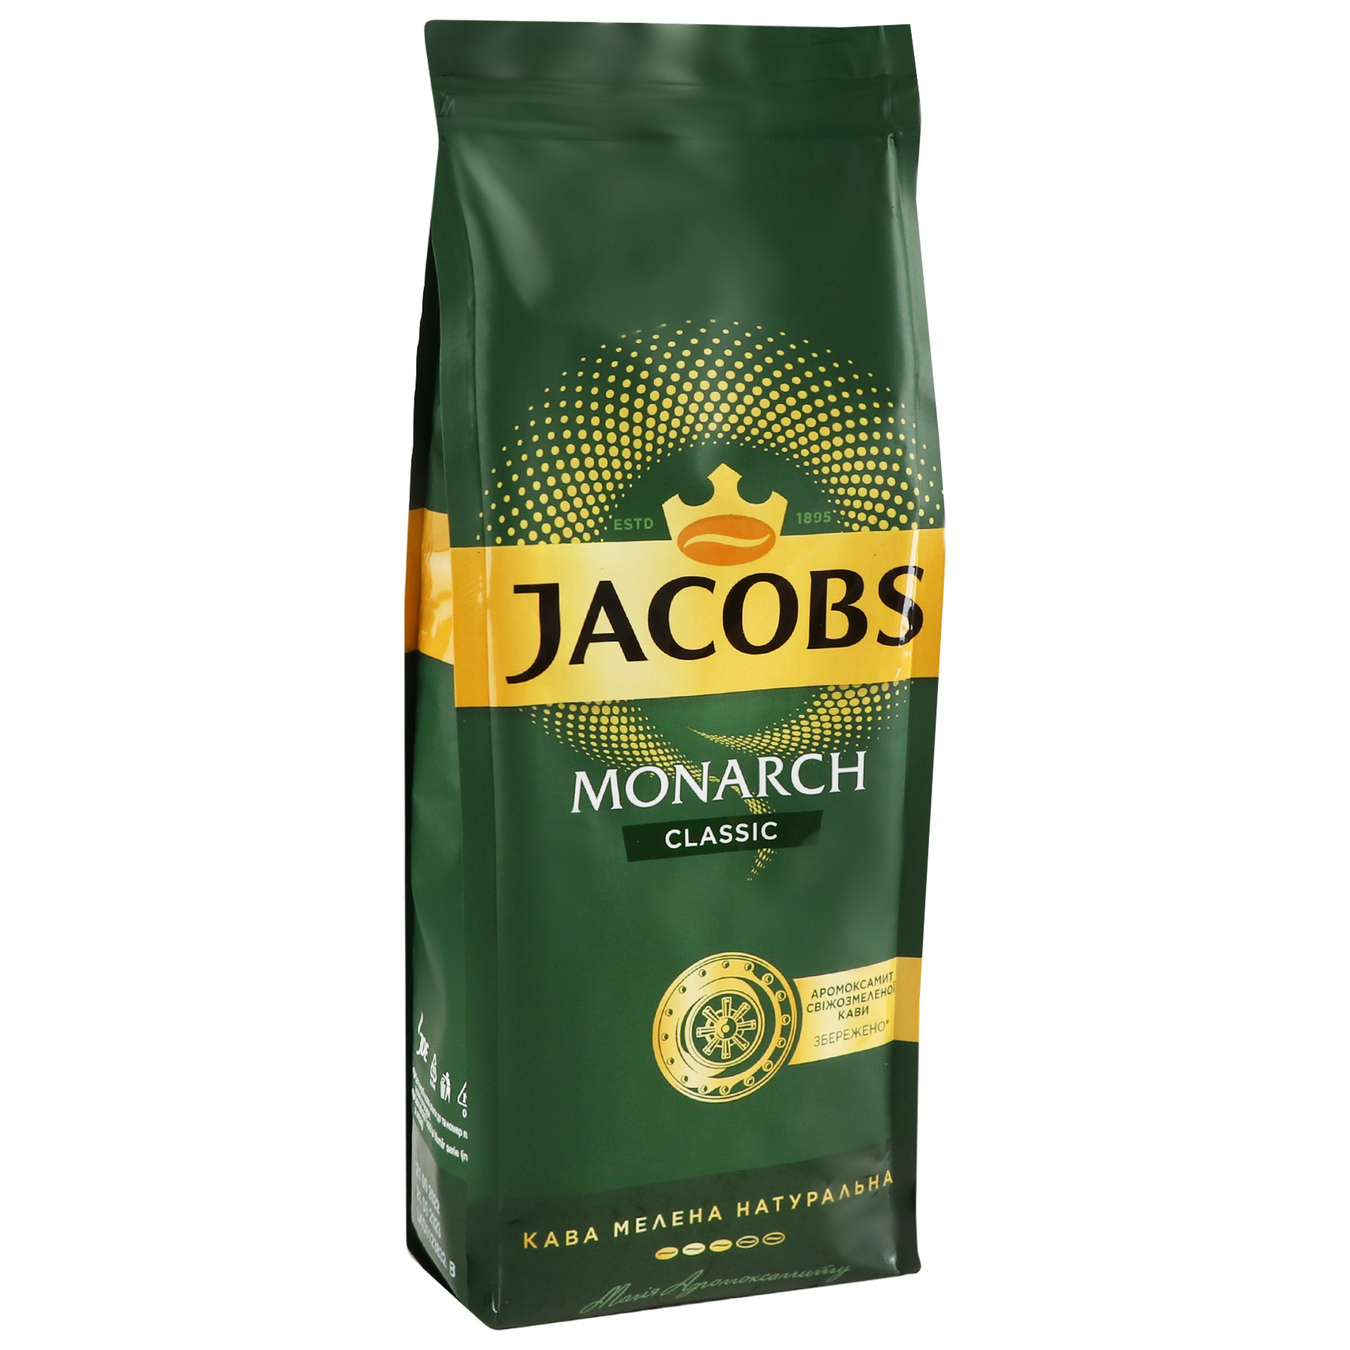 JACOBS MONARCH CLASSIC natural roasted ground coffee 200g 3